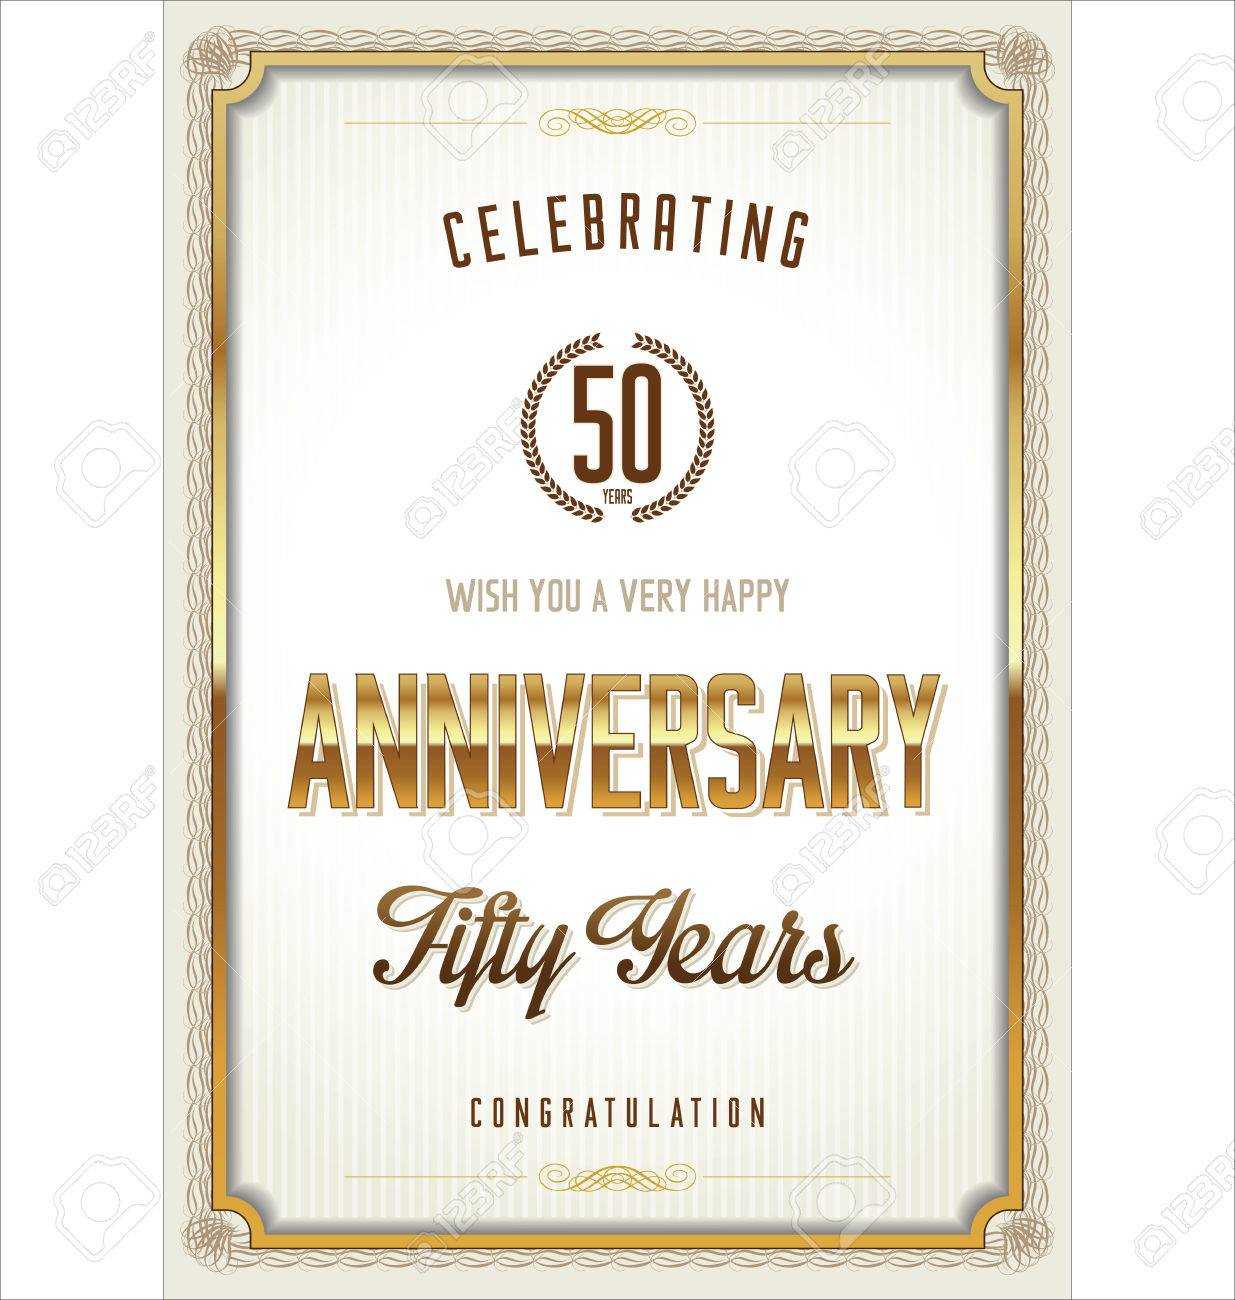 Anniversary Certificate Template With Anniversary Certificate Template Free